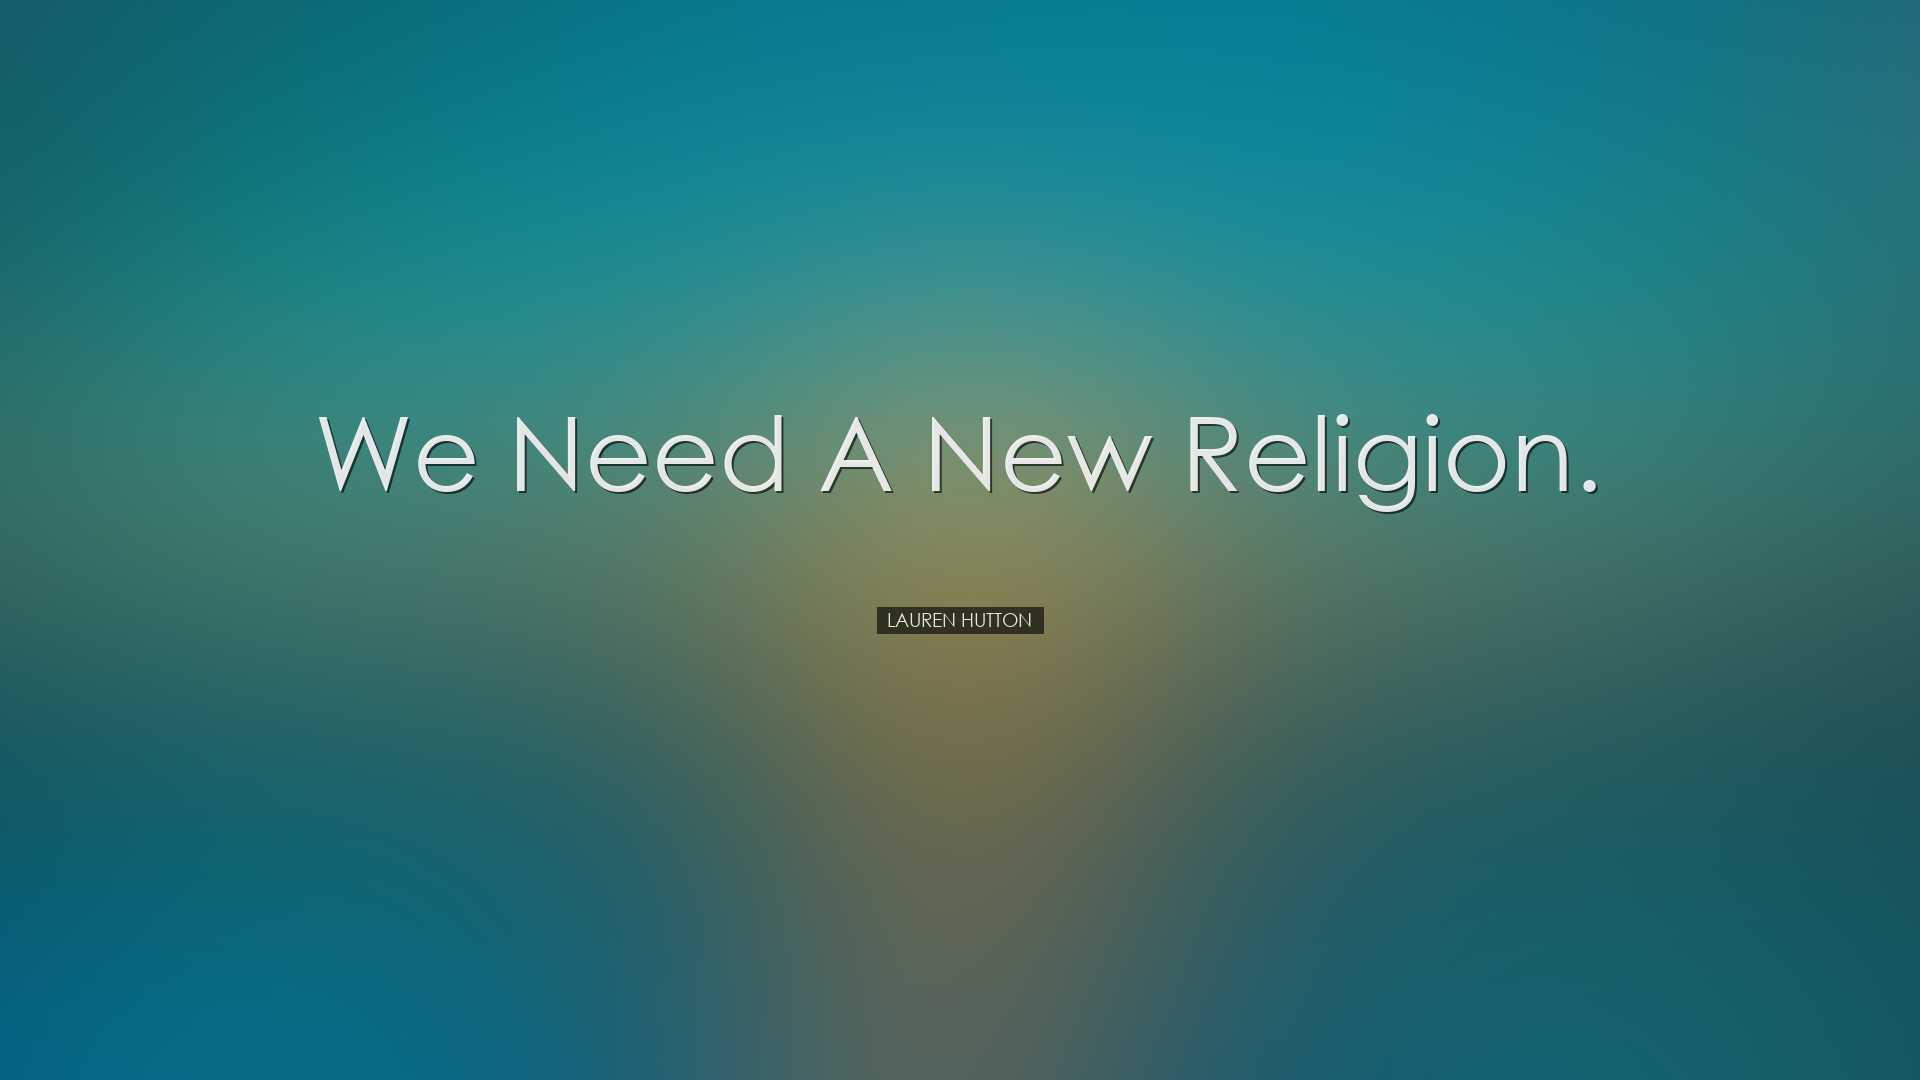 We need a new religion. - Lauren Hutton